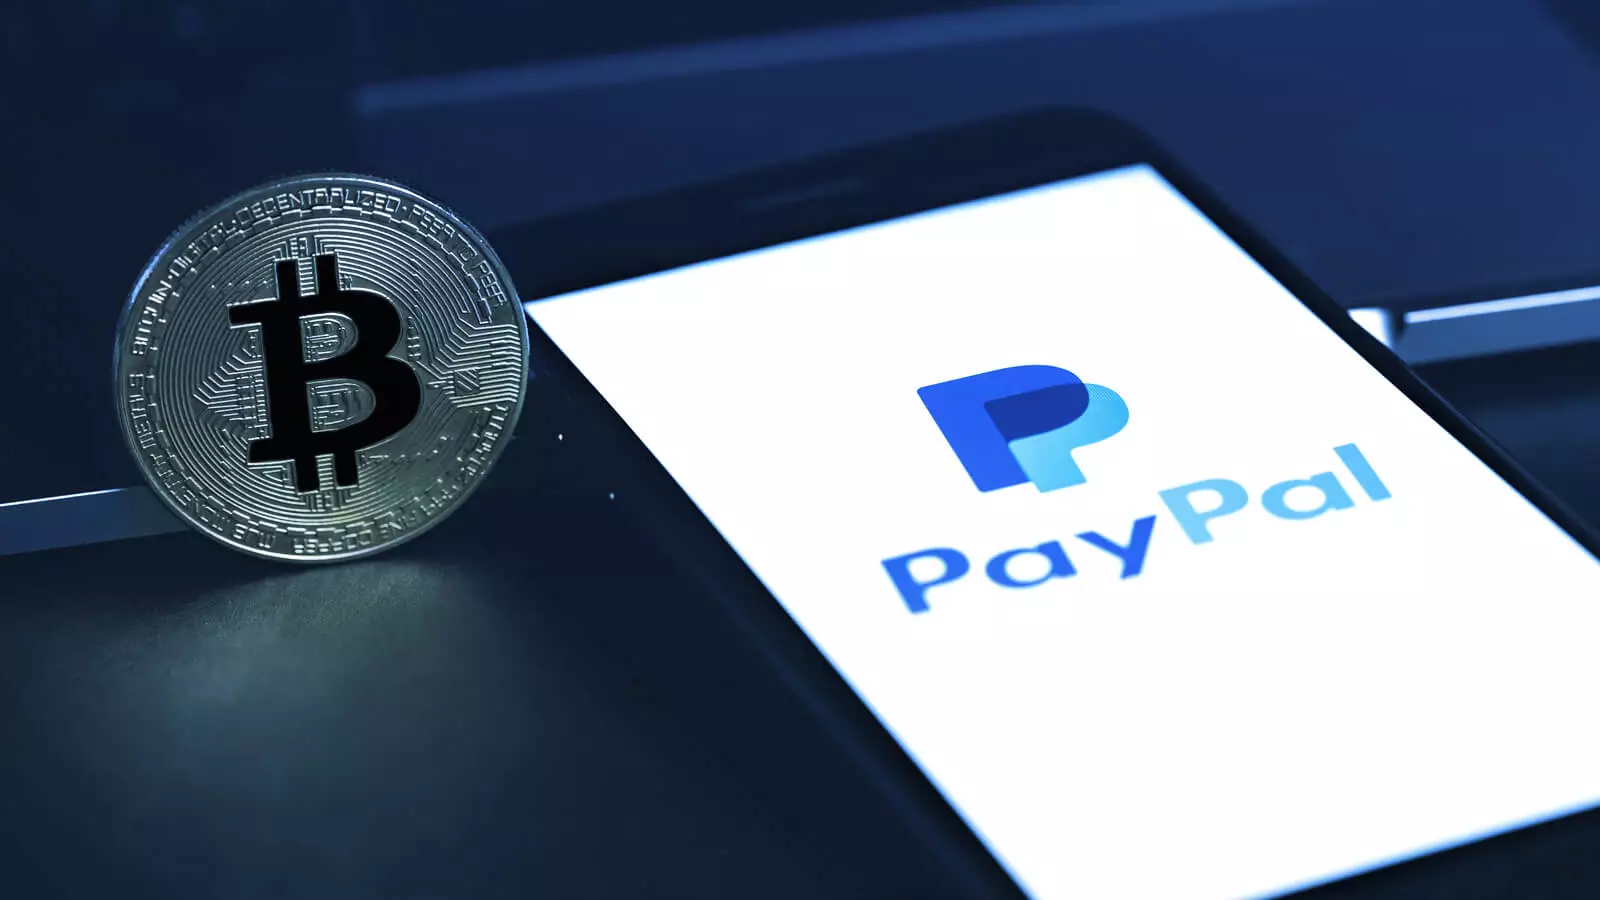 How-to-Send-Bitcoin-From-PayPal